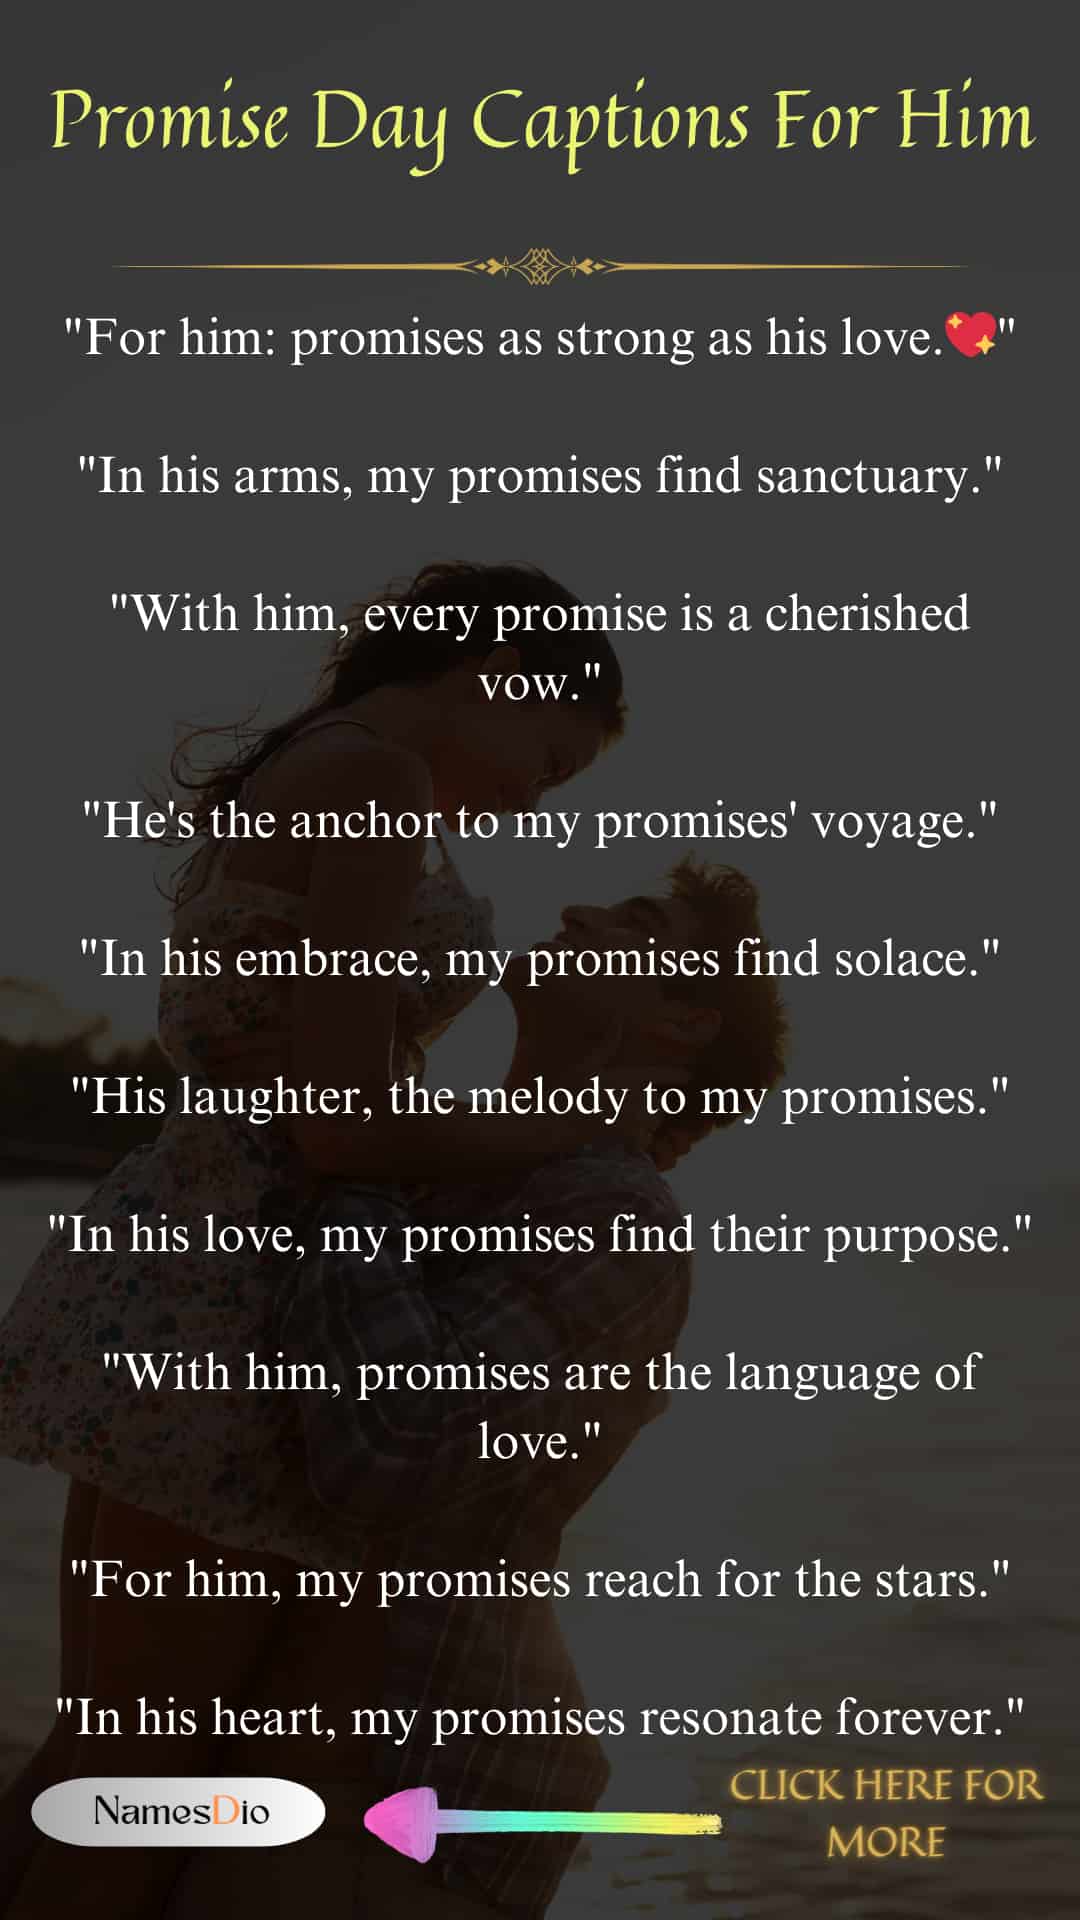 Promise-Day-Captions-For-Him